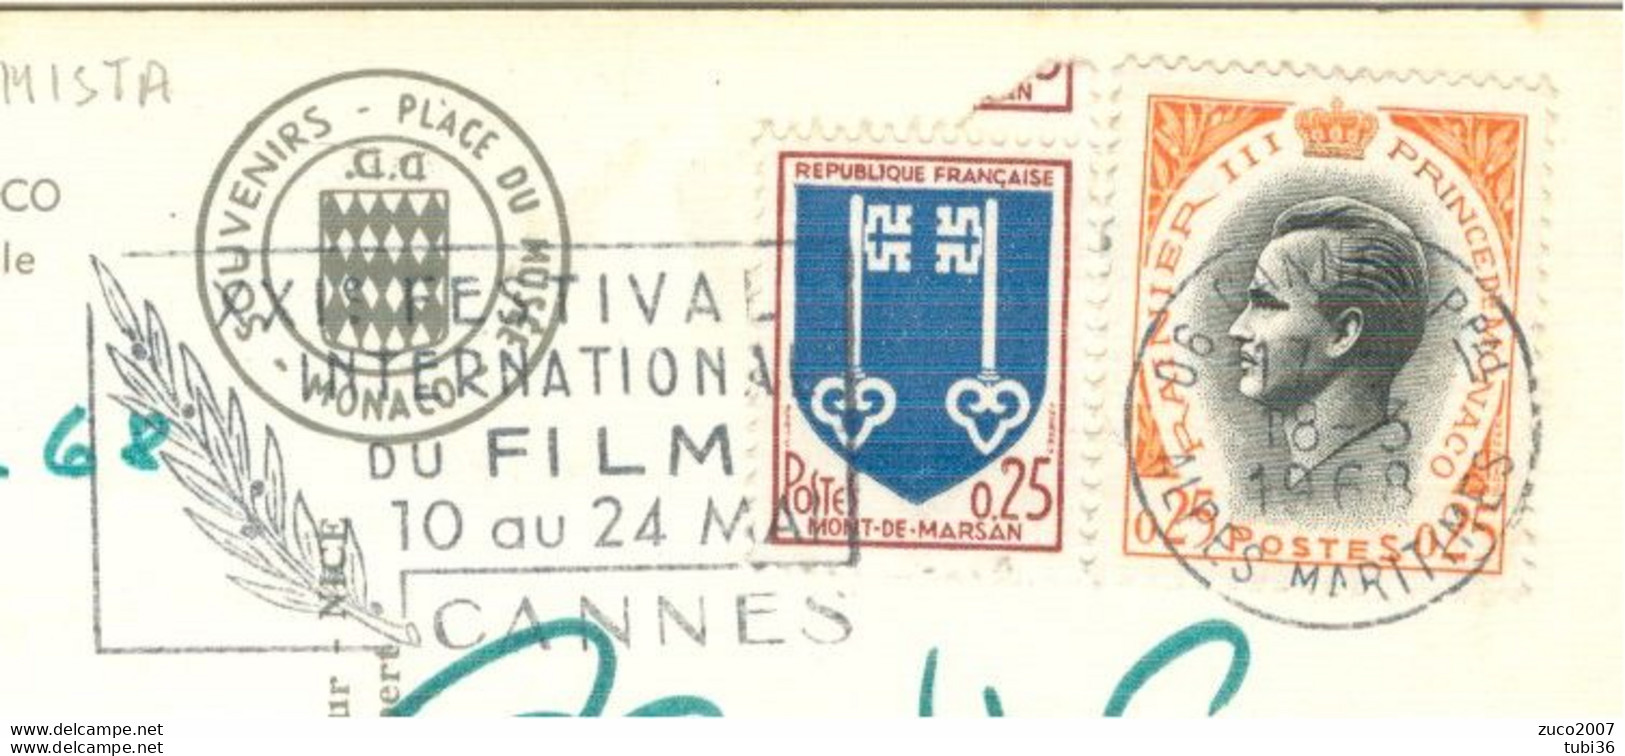 TIMBRE POSTAL, PLAQUE  CANNES 1968 - Covers & Documents